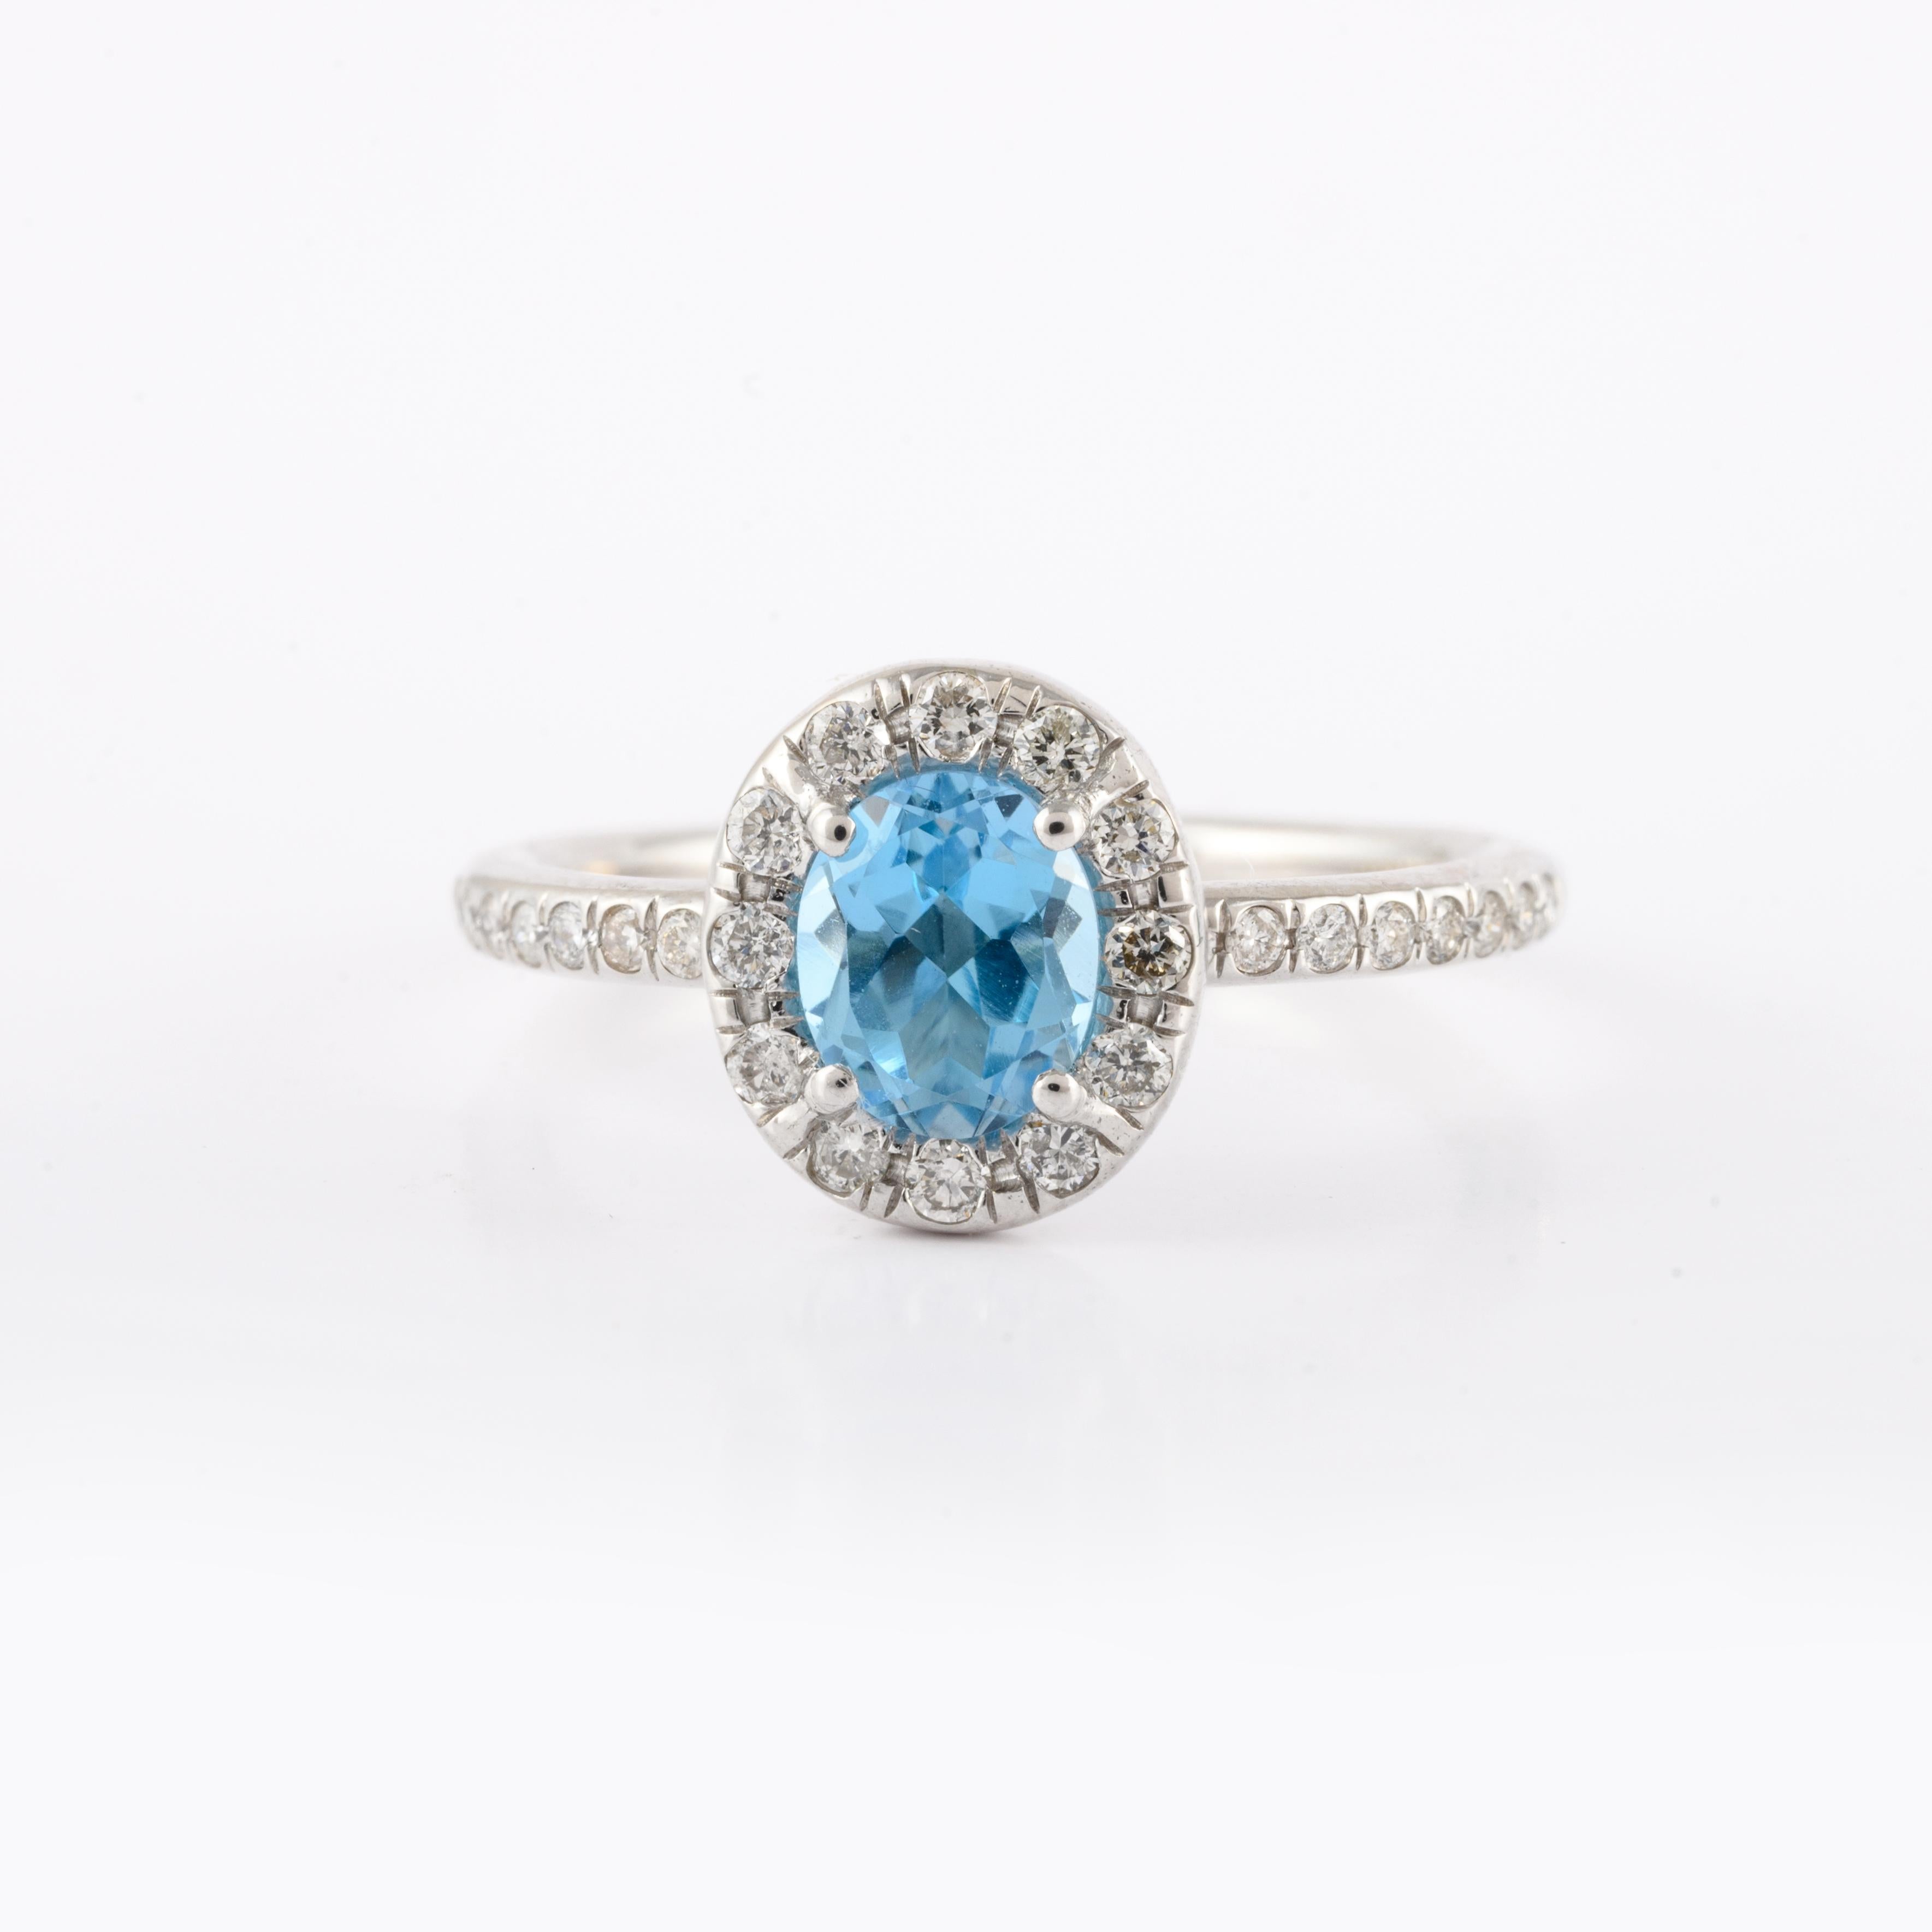 For Sale:  Real 14kt Solid White Gold Halo Diamond And Oval Cut Blue Topaz Ring For Her 2